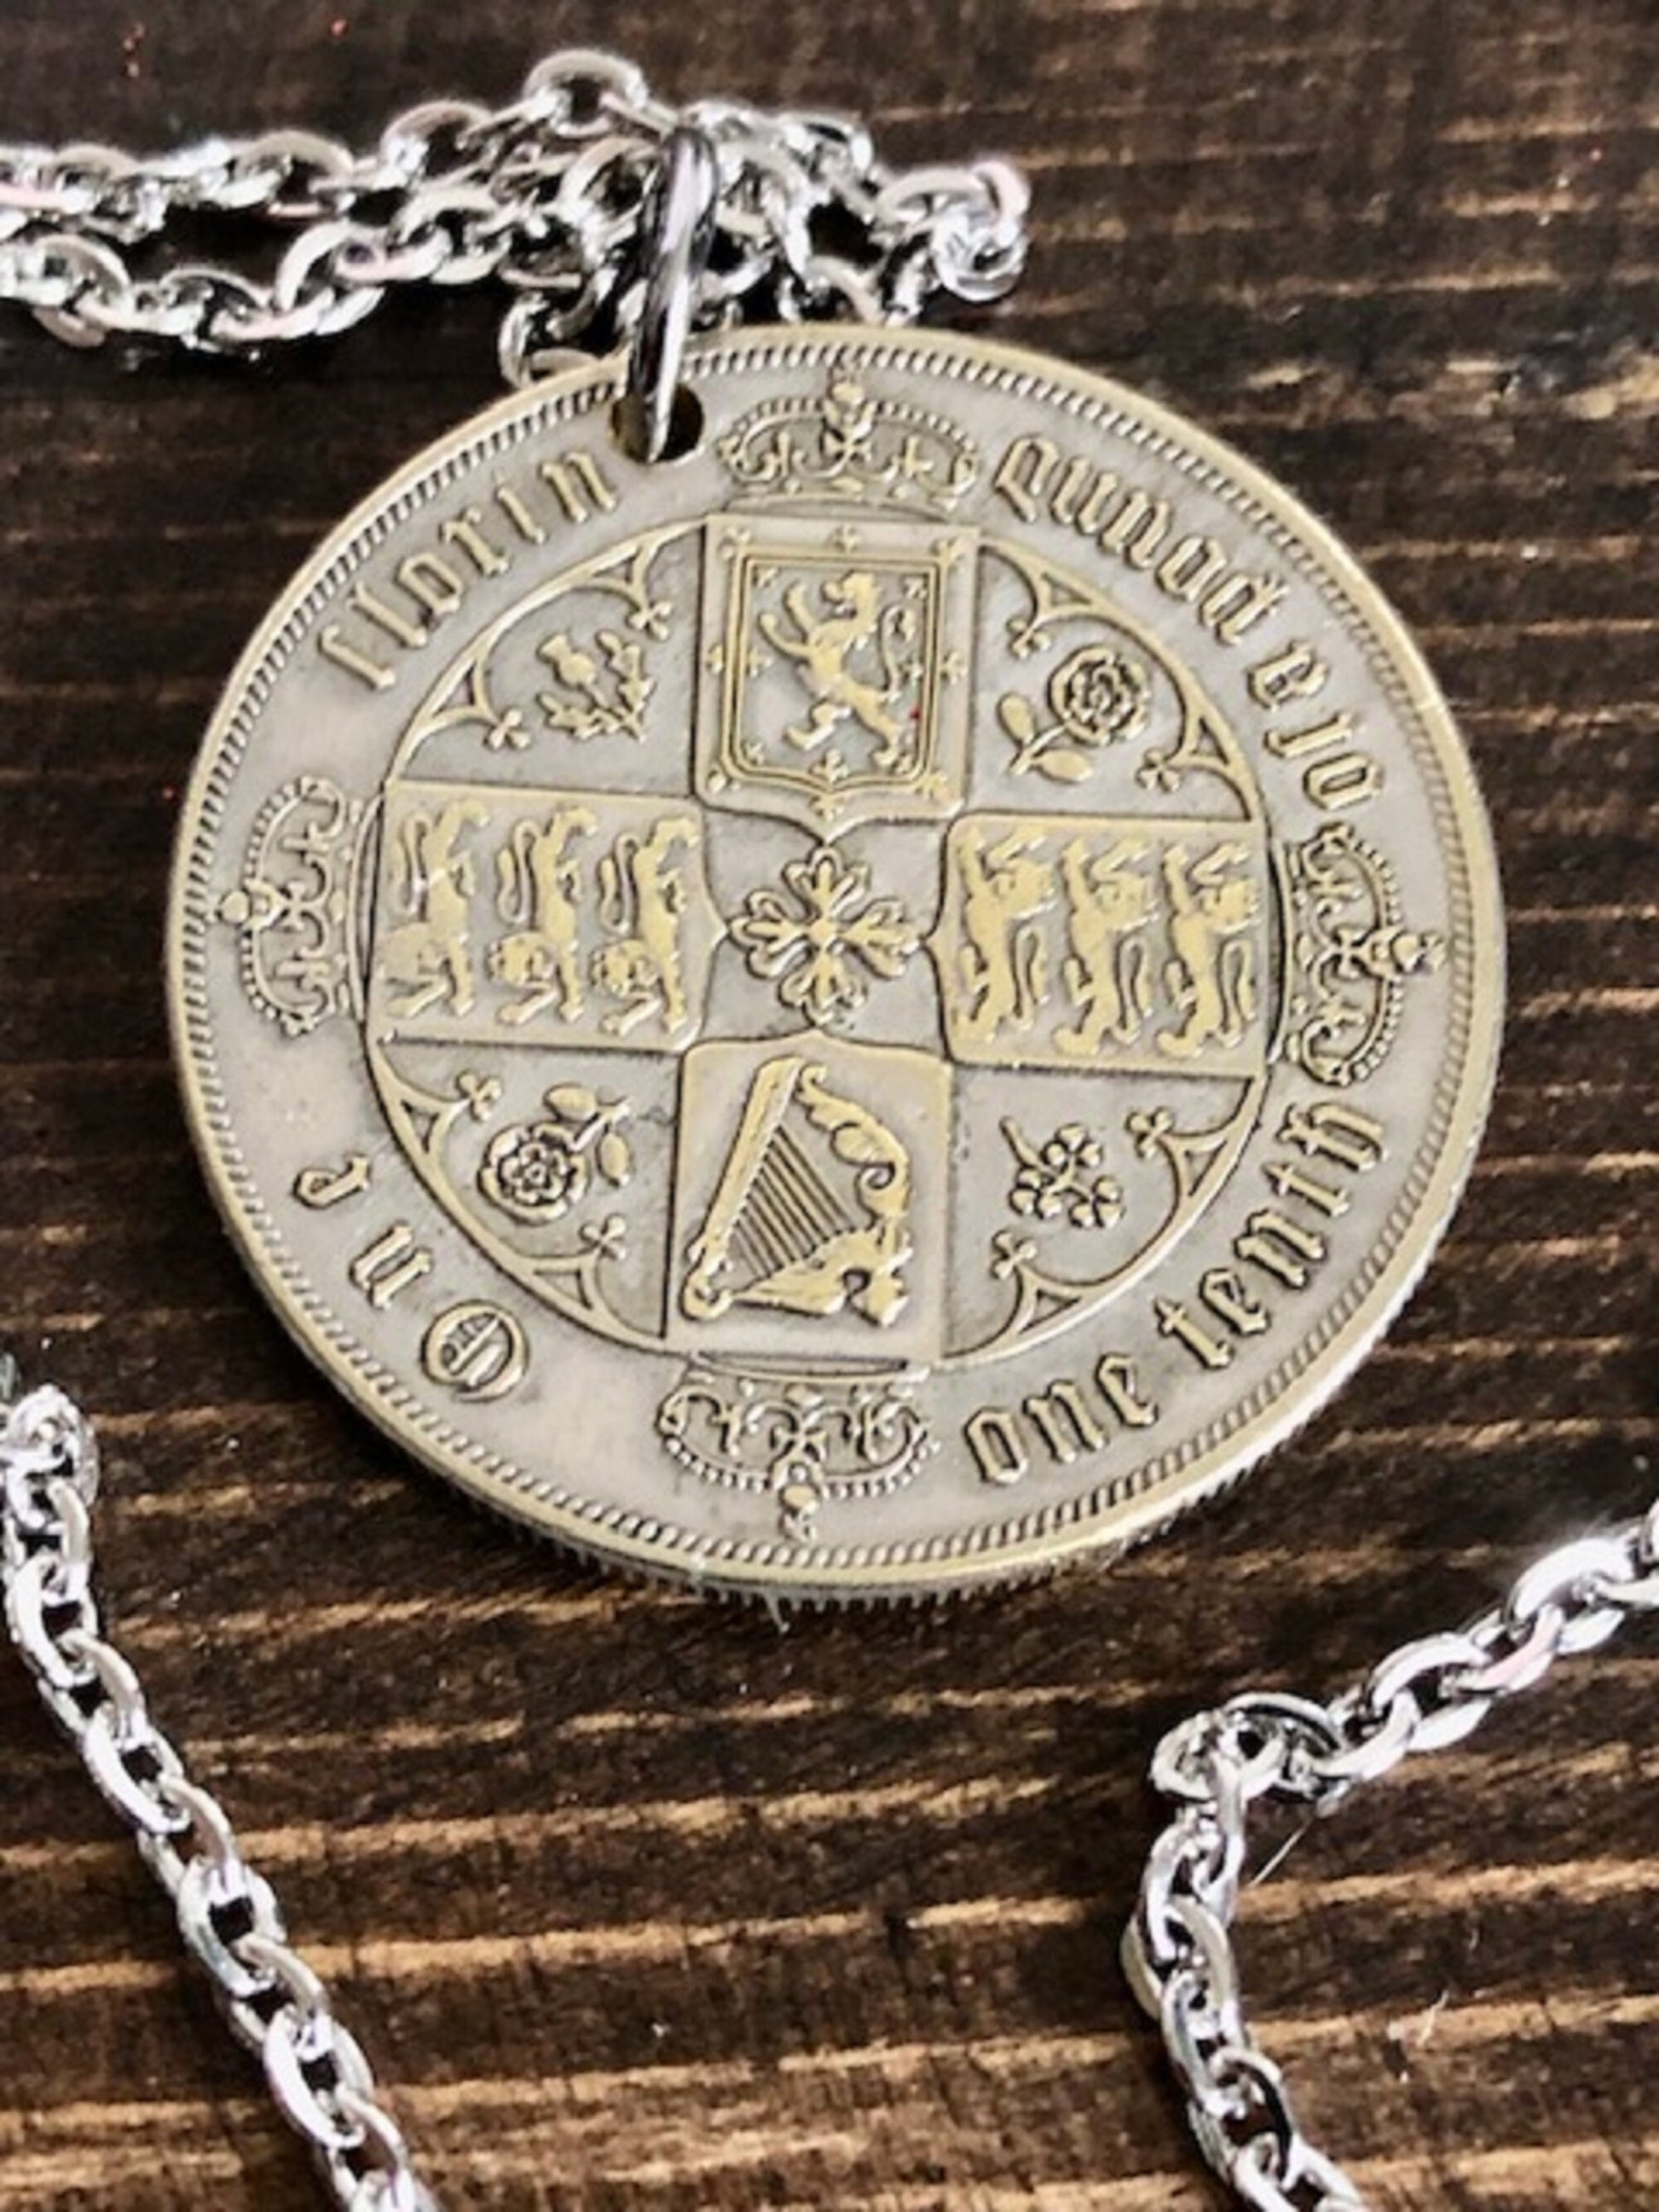 Replica British Coin Necklace - Pendant United Kingdom British Replica COPY Pendant Custom Made For Entertainment Only - Coin Enthusiast